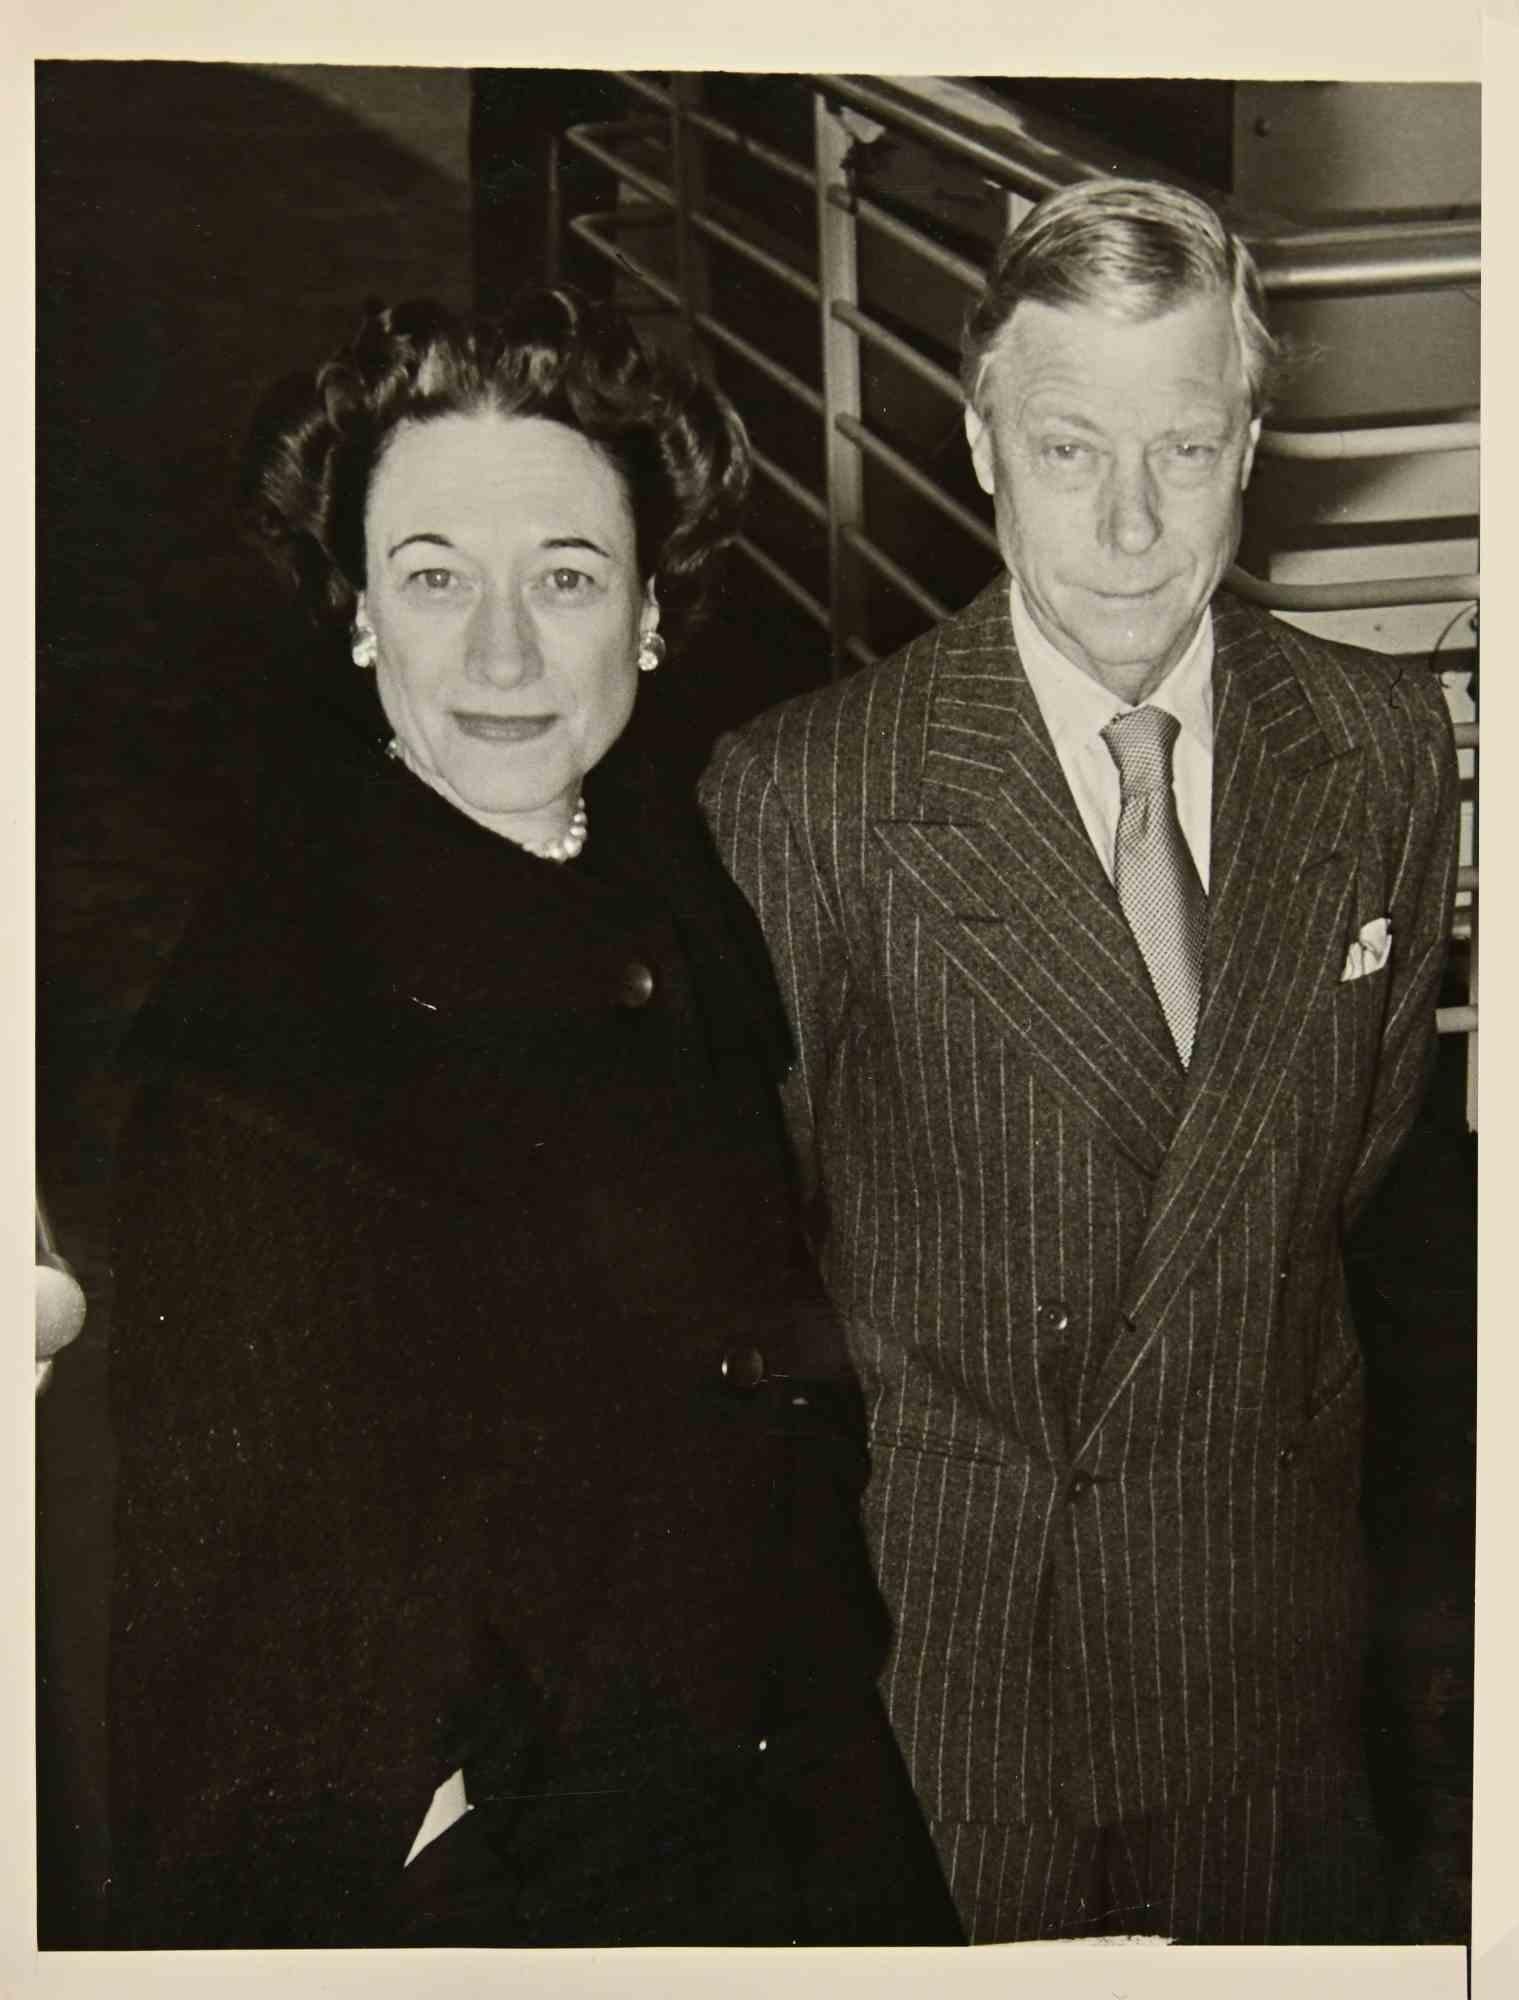 Unknown Portrait Photograph - The Dukes of Windsor Visiting New York - Vintage Photograph - 1956